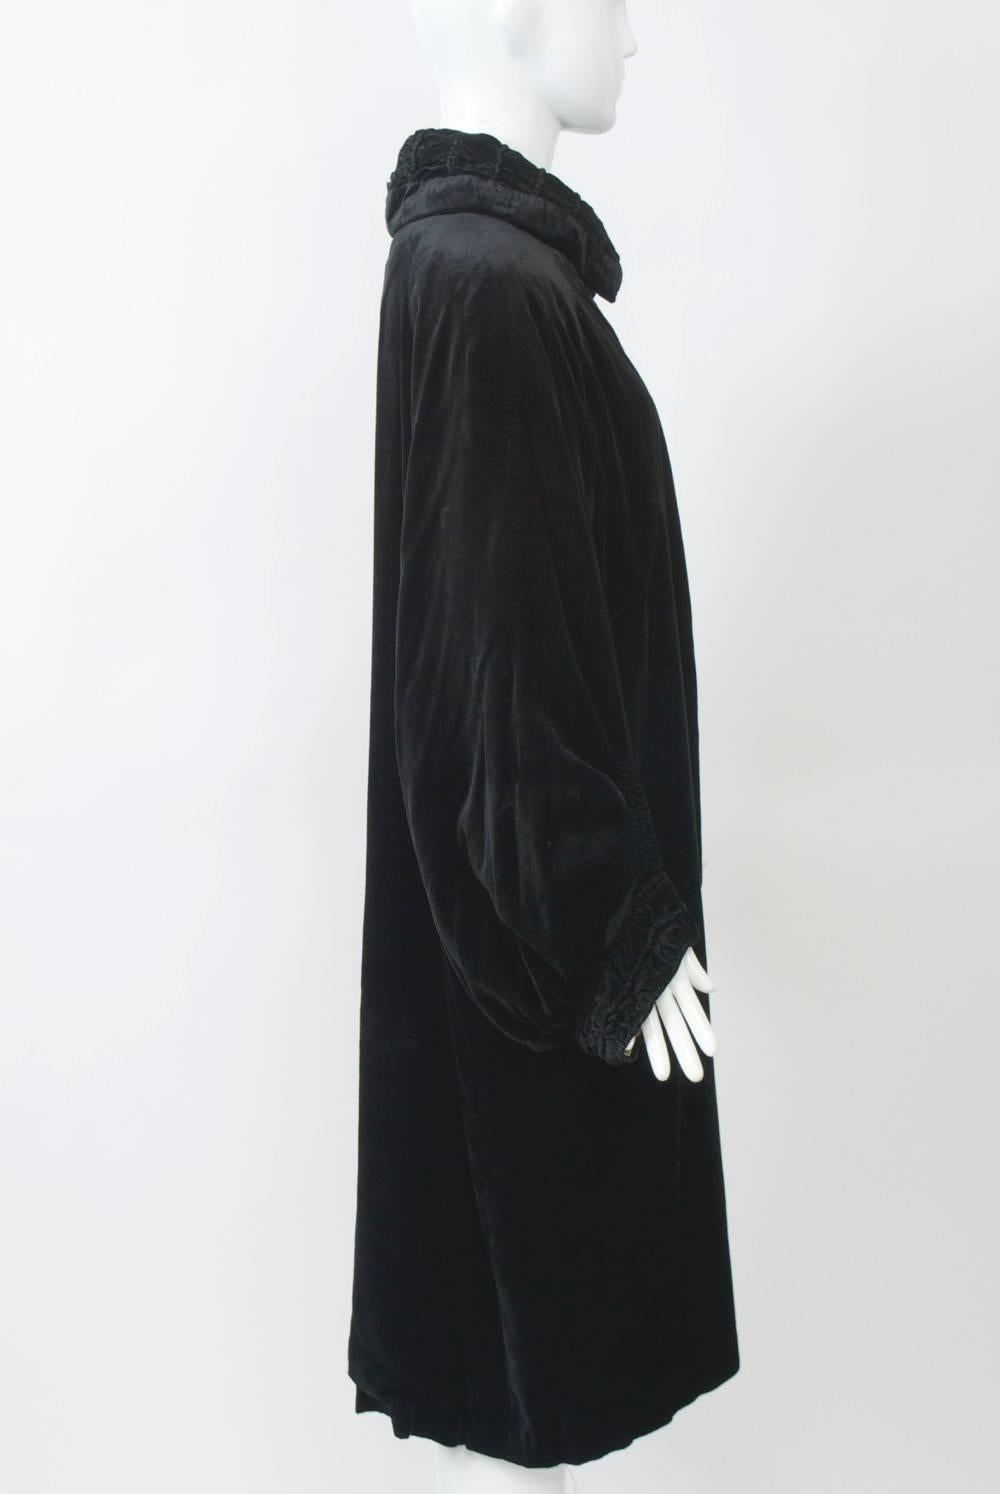 Black velvet opera coat featuring a ruched collar and wrists. Loose fit with curved front hem and balloon sleeves. Single rhinestone button closure. White satin lining.